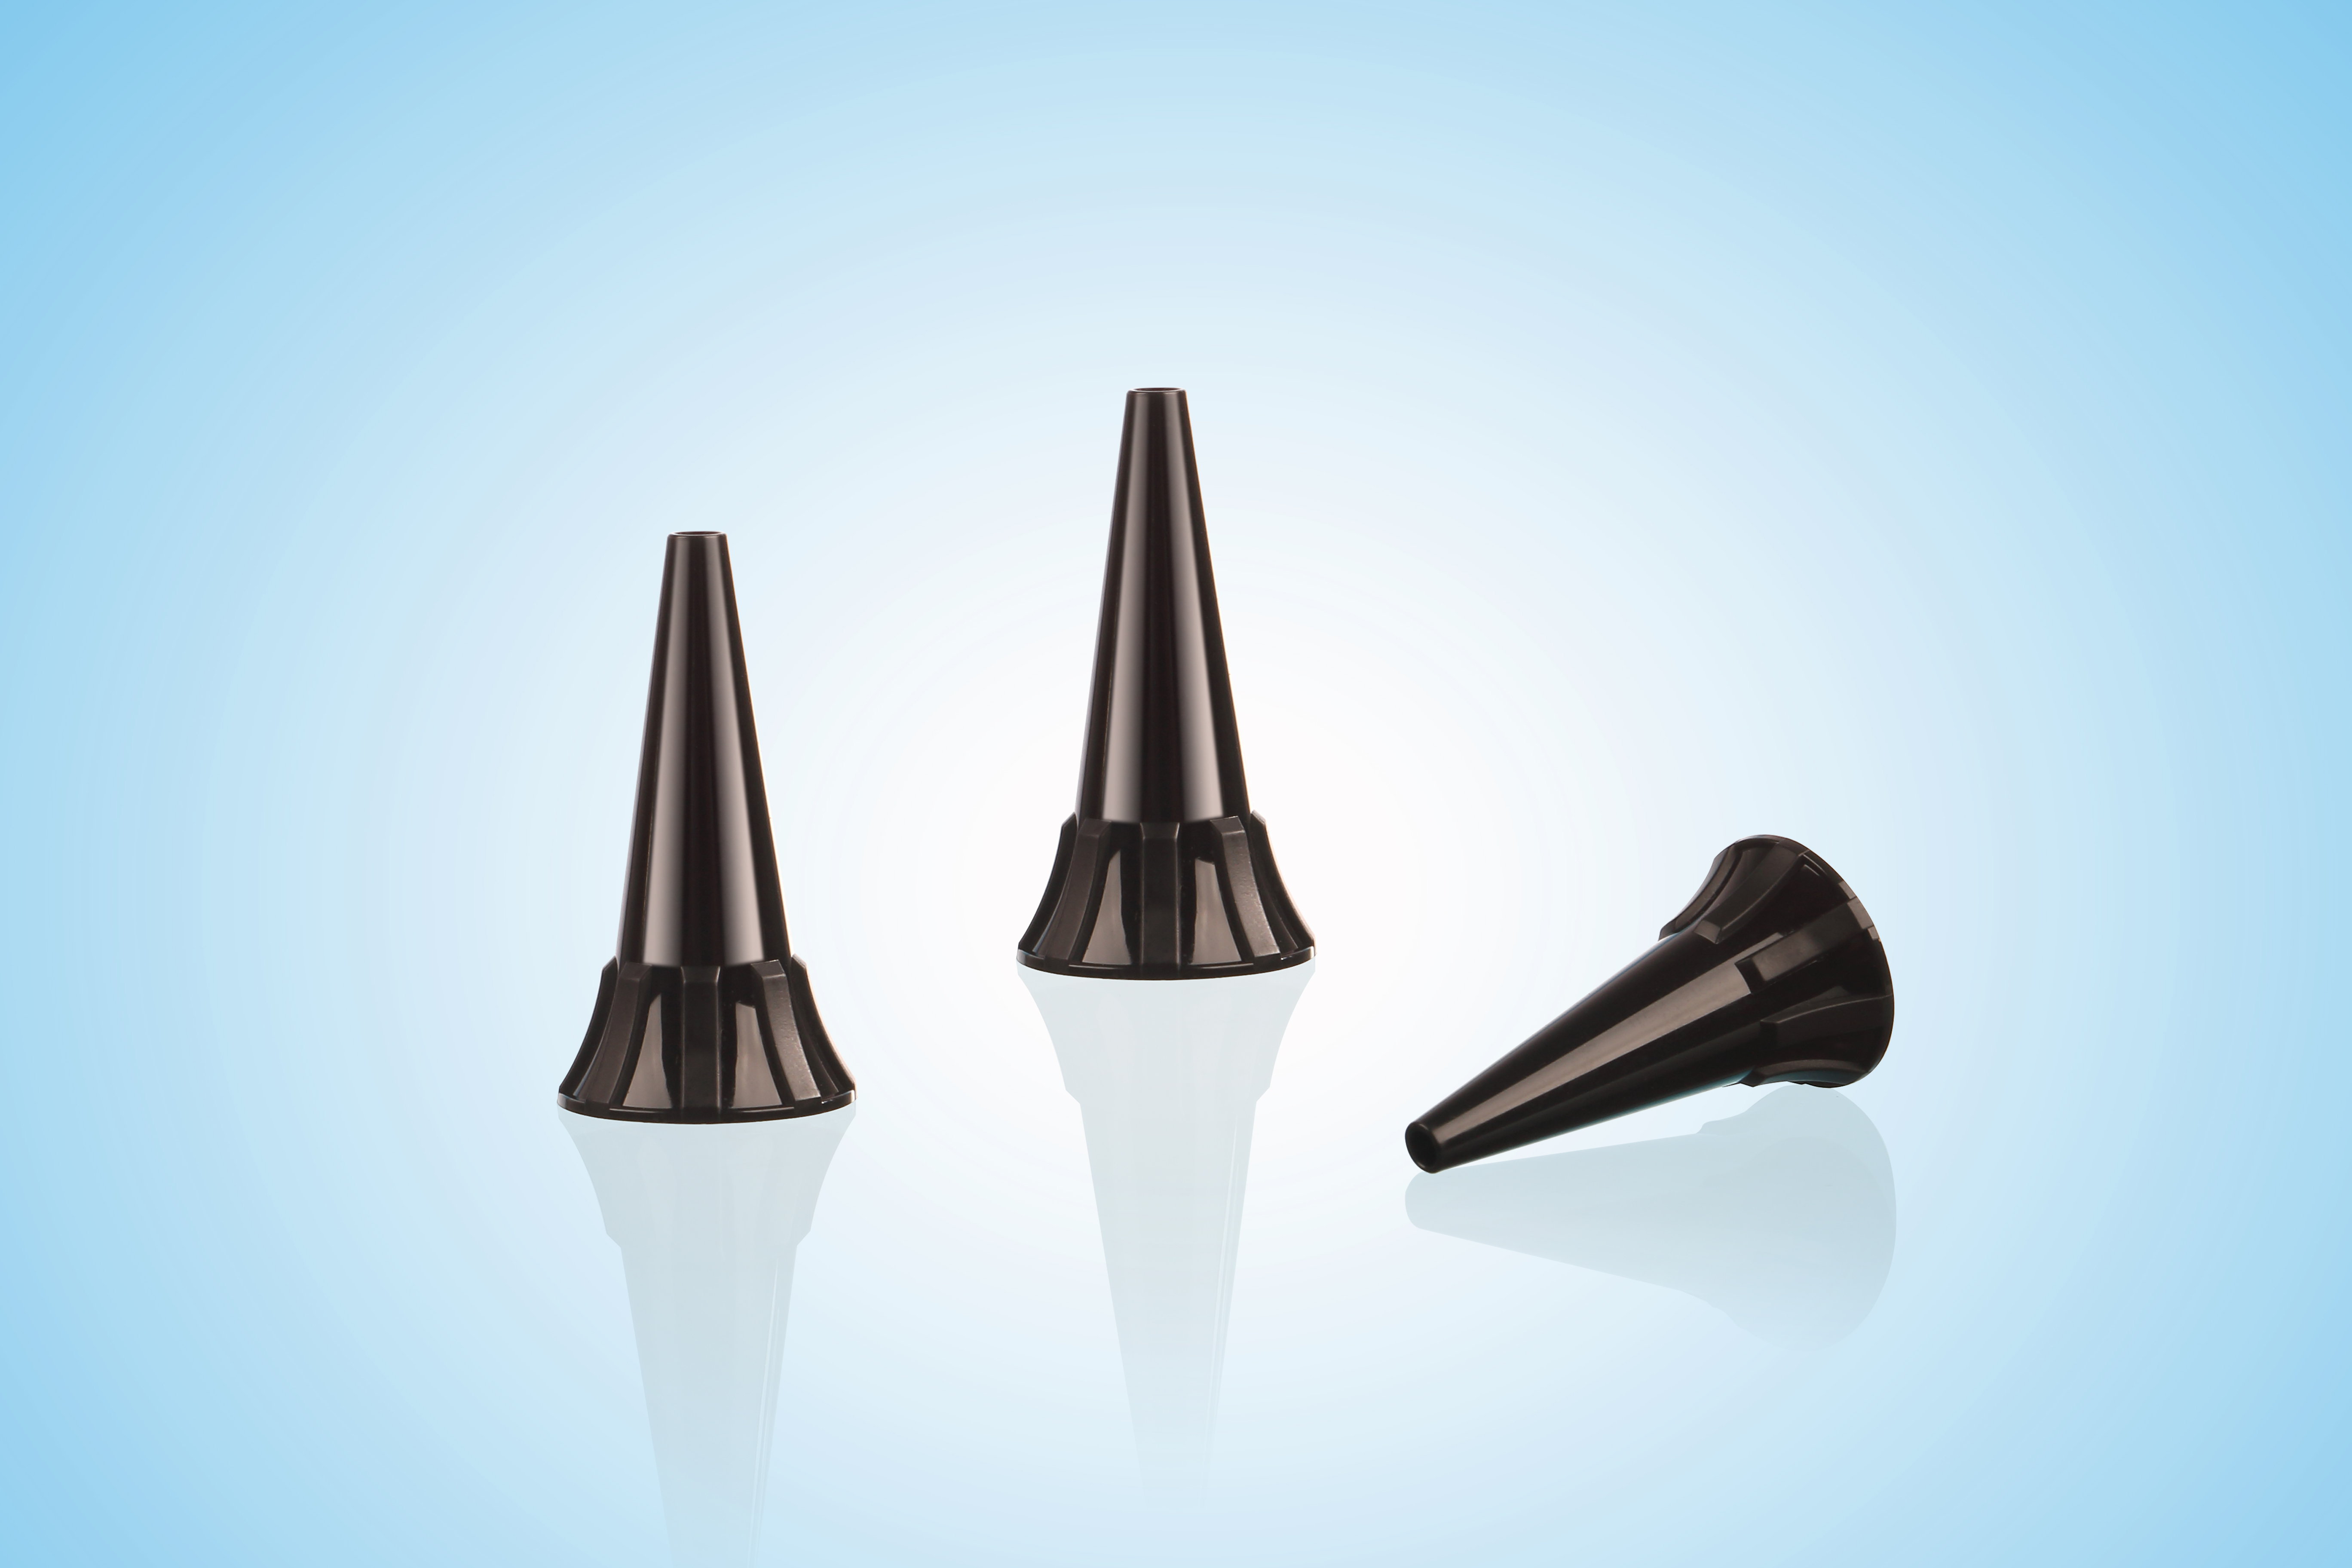 Large ear funnel and small ear funnel